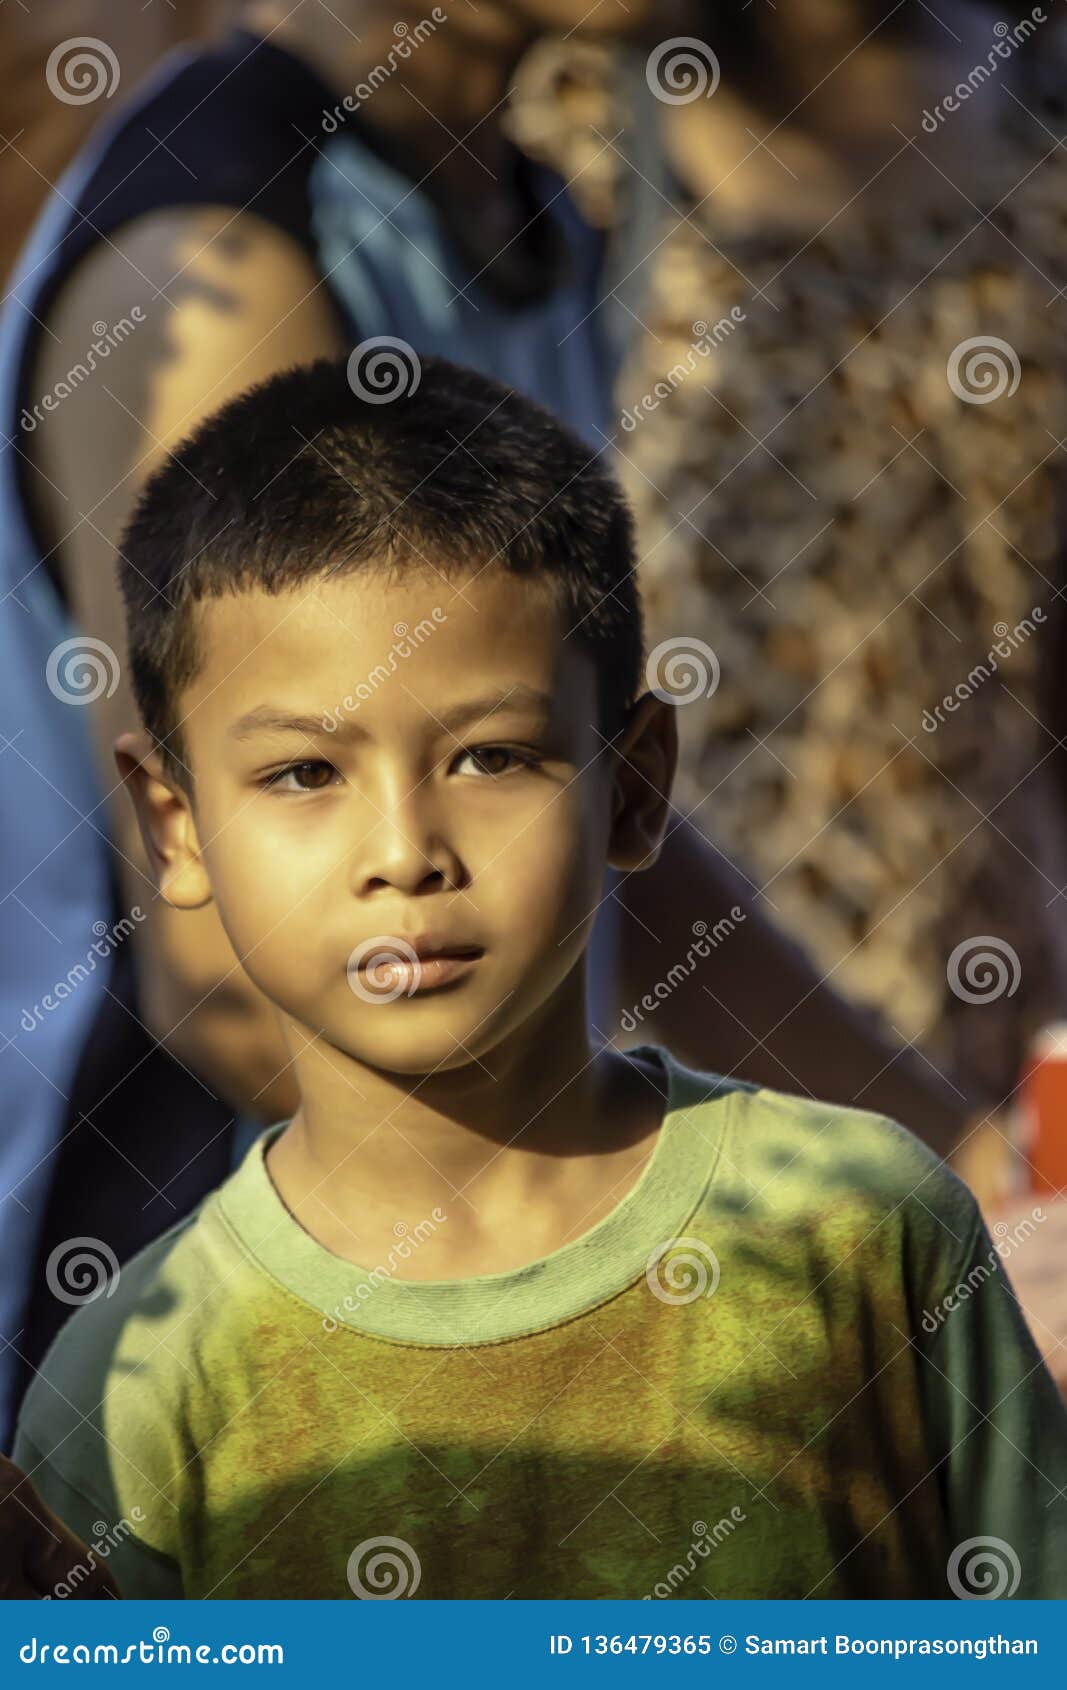 Portrait Asian Boy Standing Looking Background Blur People Stock Image ...